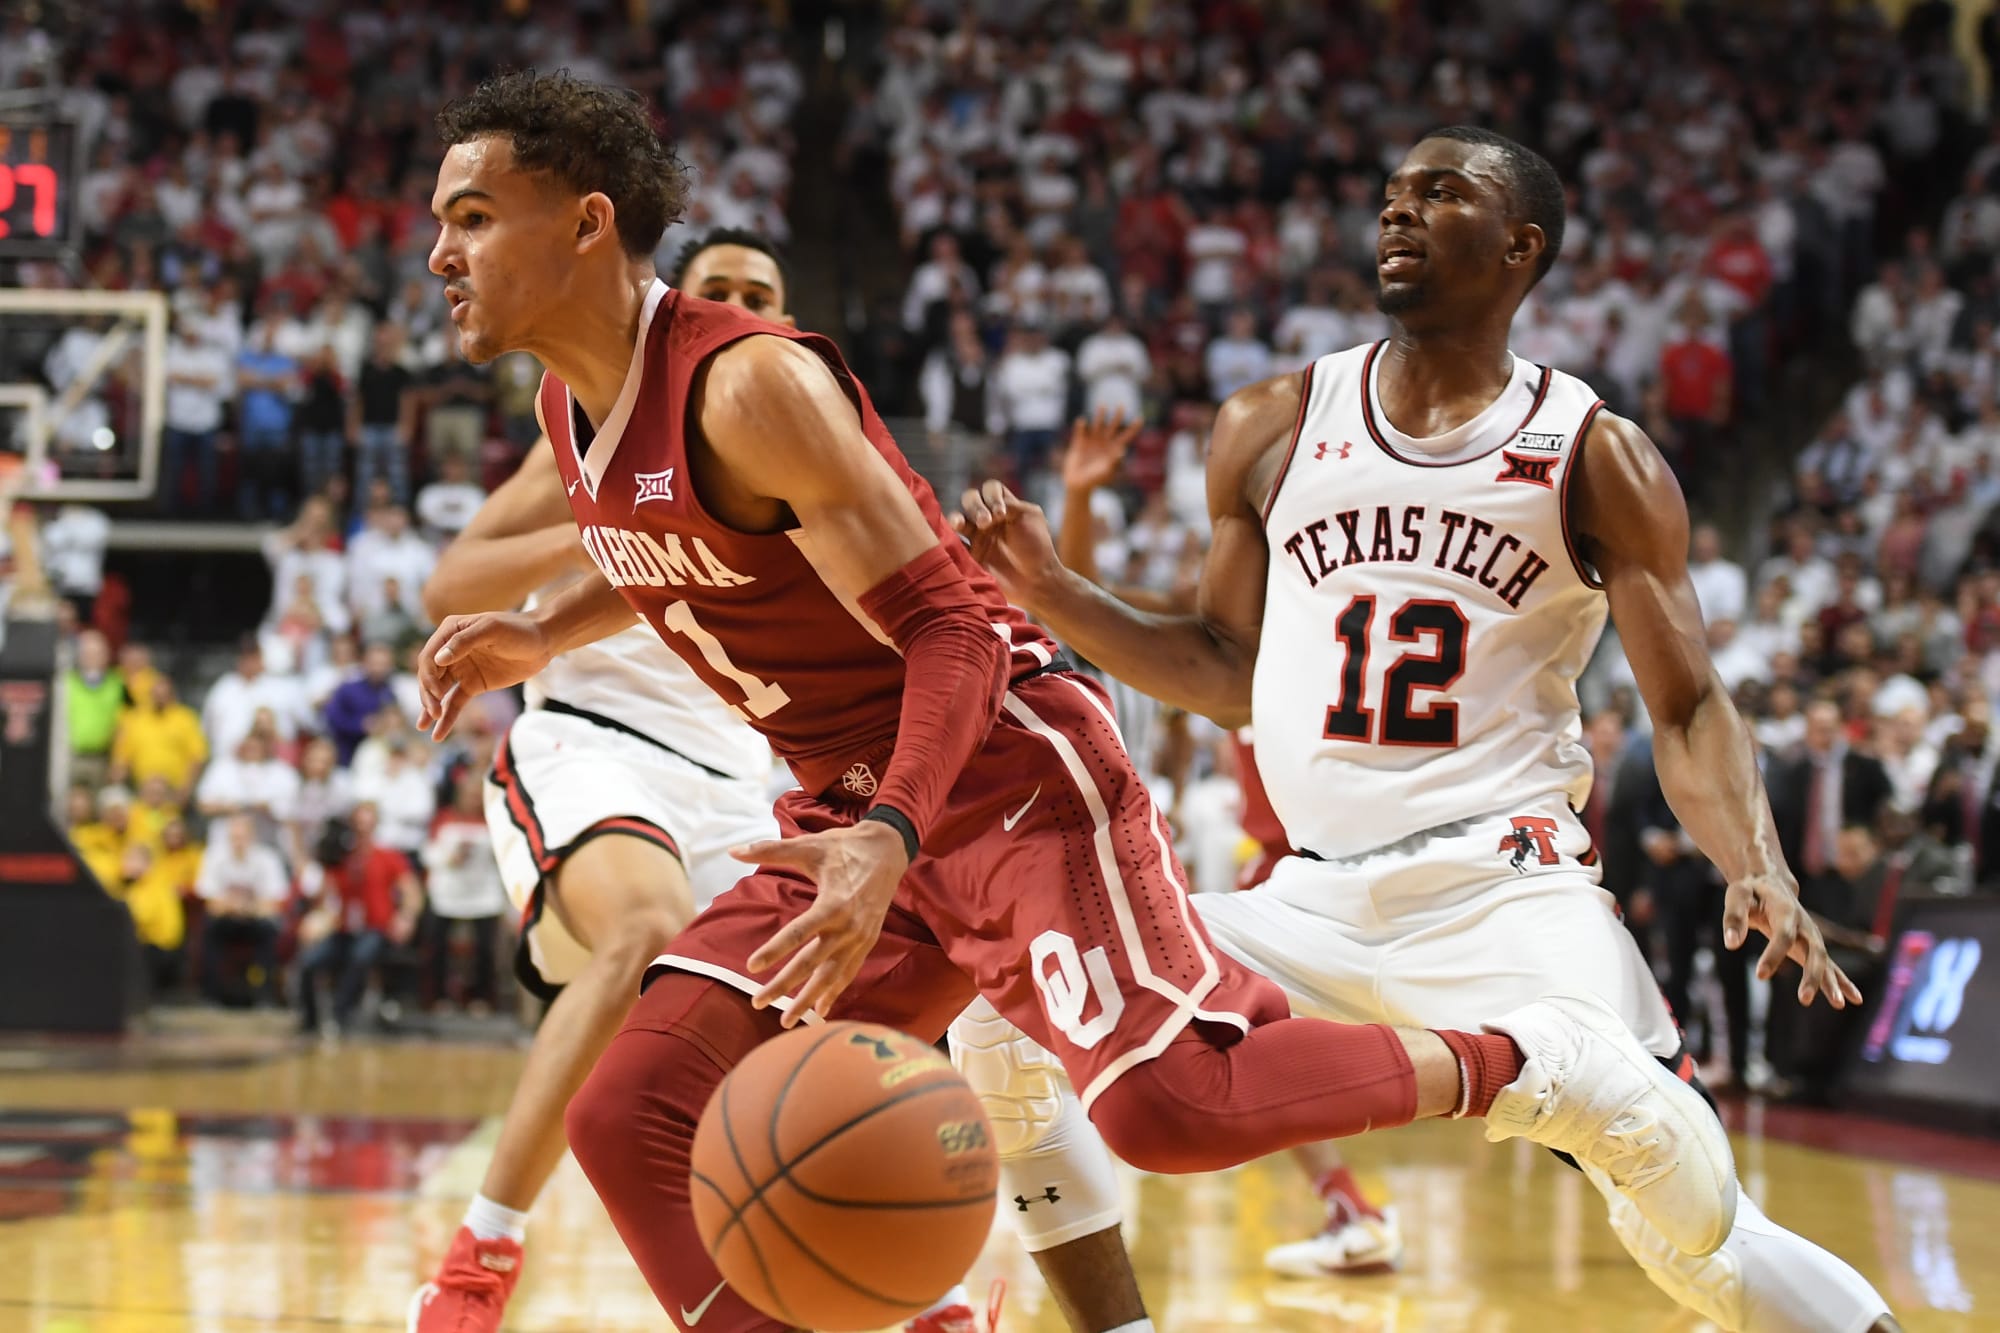 Oklahoma basketball Sooners go down for fourth consecutive game